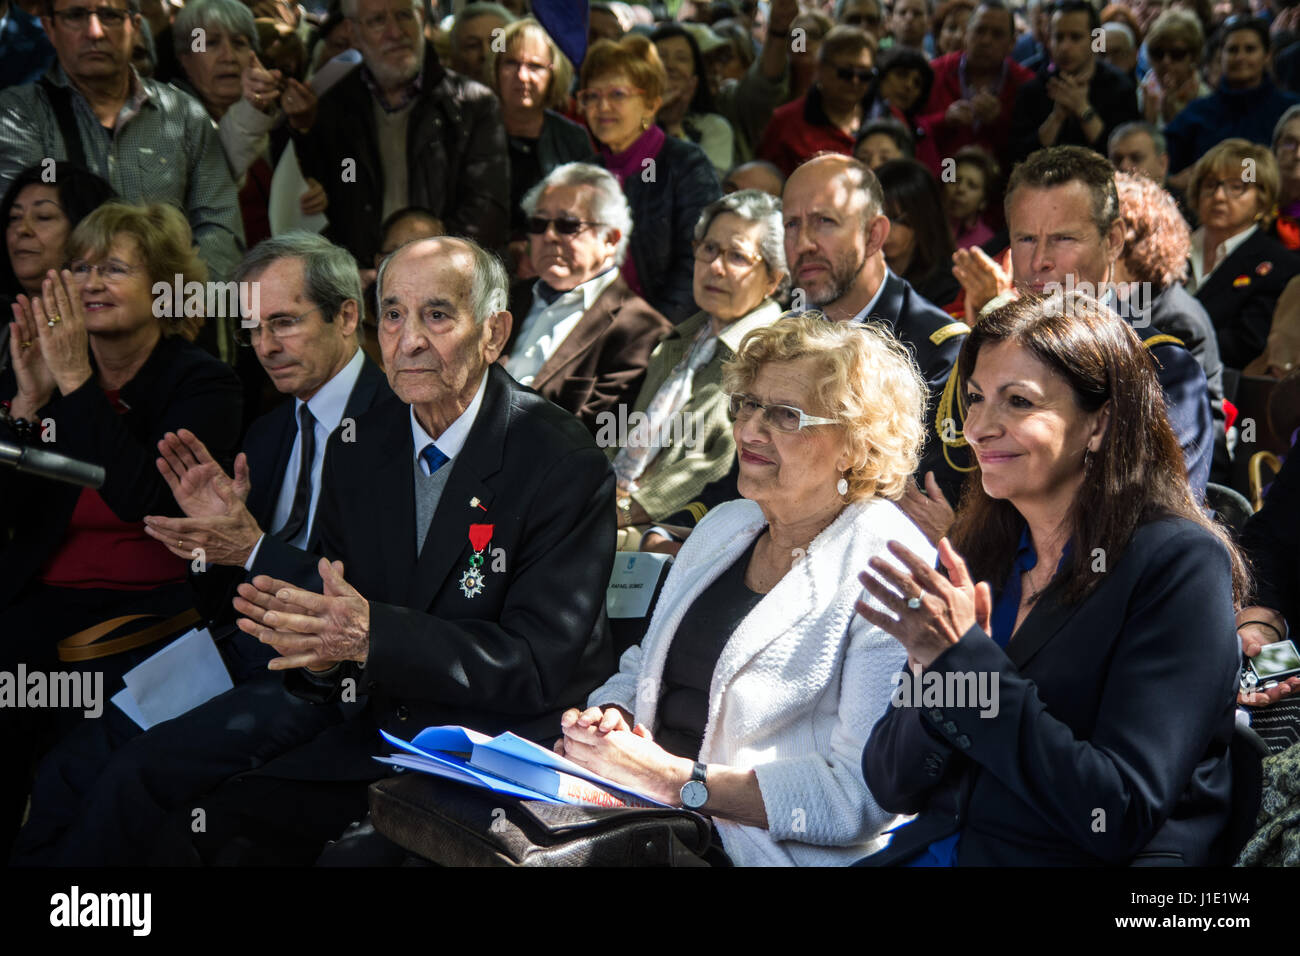 Madrid, Spain. 20th April, 2017. Mayor of Madrid Manuela Carmena (M), Mayor of Paris Anne Hidalgo (R) and Rafael G—mez (L), the only living member of the squadron, during the commemoration of the Garden of the fighters of 'The Nine', the battalion of Spaniards that liberated Paris of Nazism, in Madrid, Spain. Credit: Marcos del Mazo /Alamy Live News Stock Photo